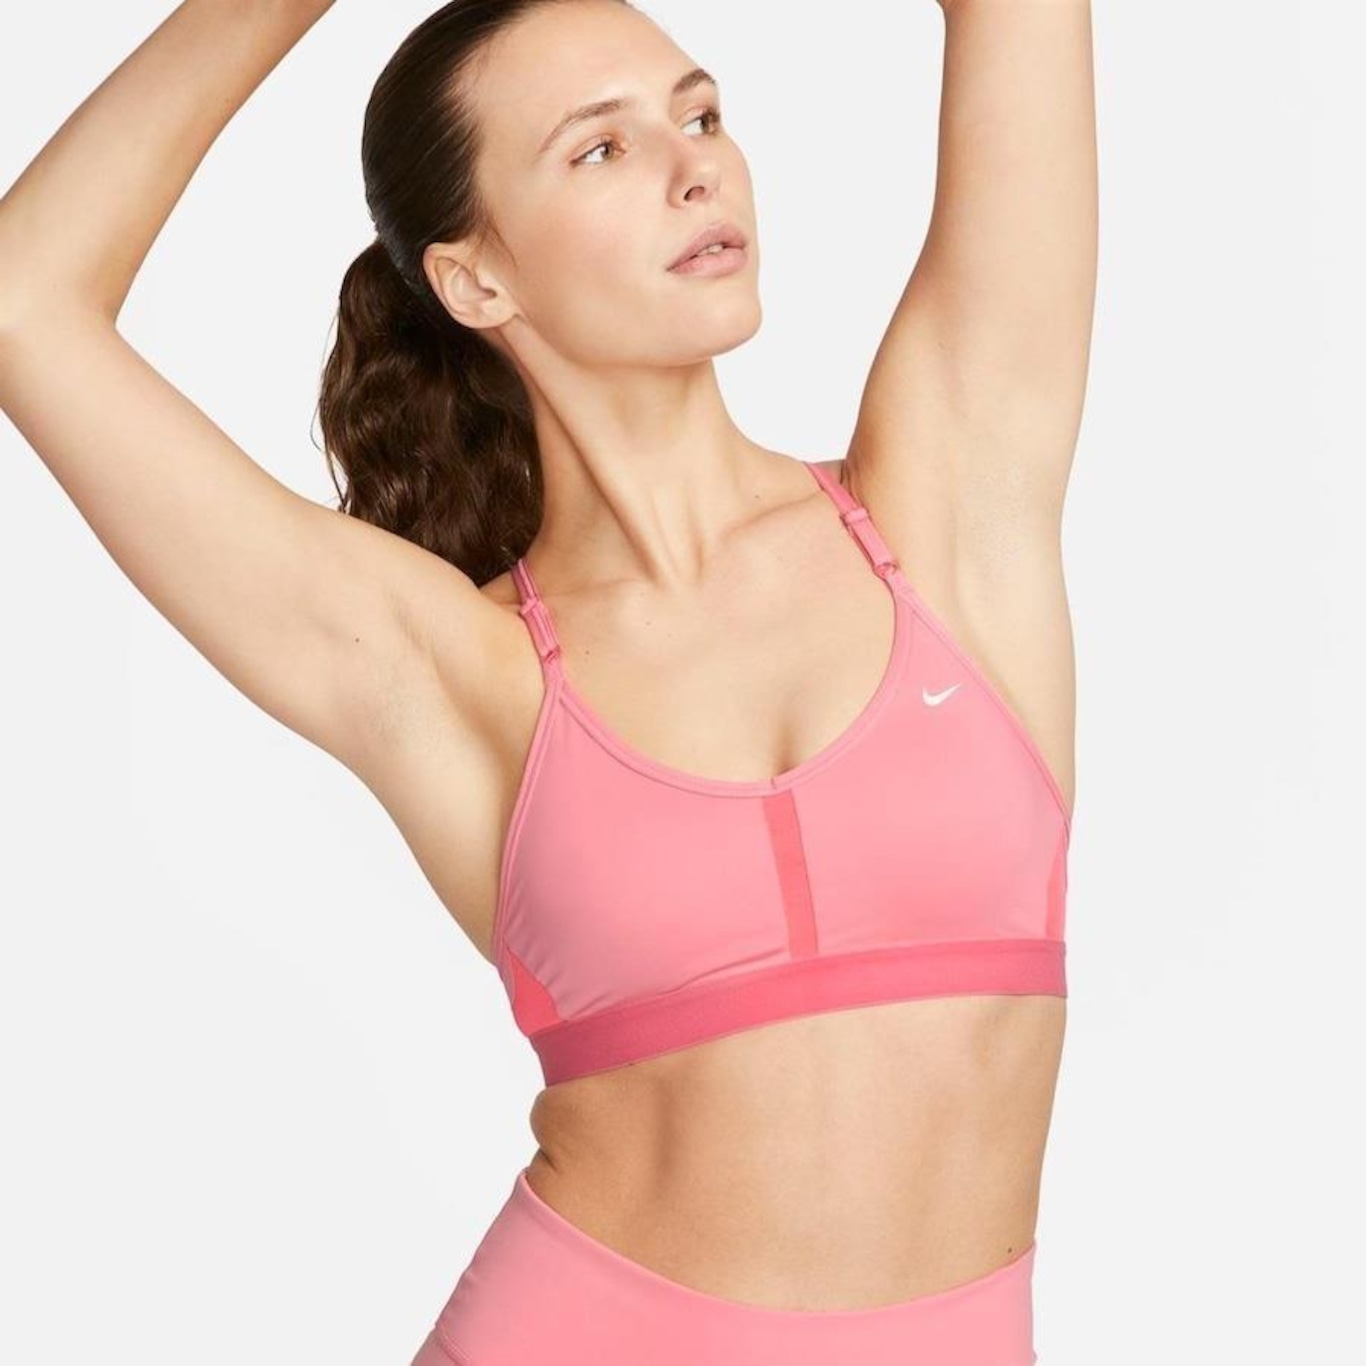 Nike Training Plus Indy light support sports bra in pink